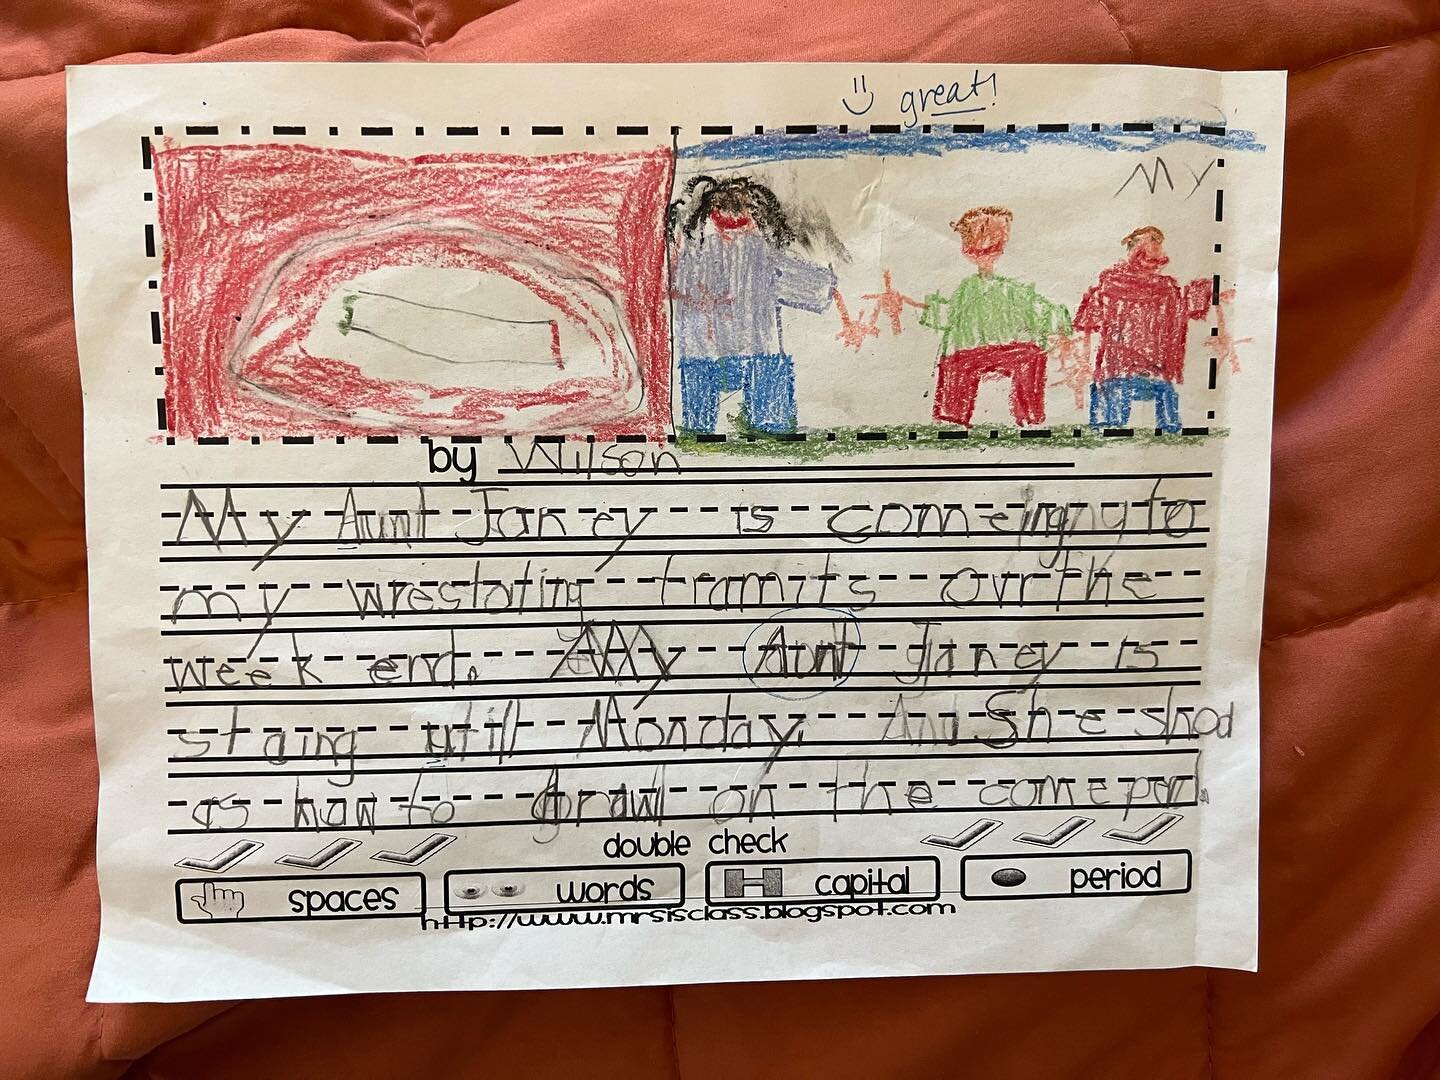 Oh wow! I am cleaning out  an old dresser and came across this little gem. My nephew Wilson drew this picture and practiced his writing in &hellip;what grade? Maybe second? I ❤️❤️❤️ this! He&rsquo;s not a kid anymore! Swipe to see him all grown up an